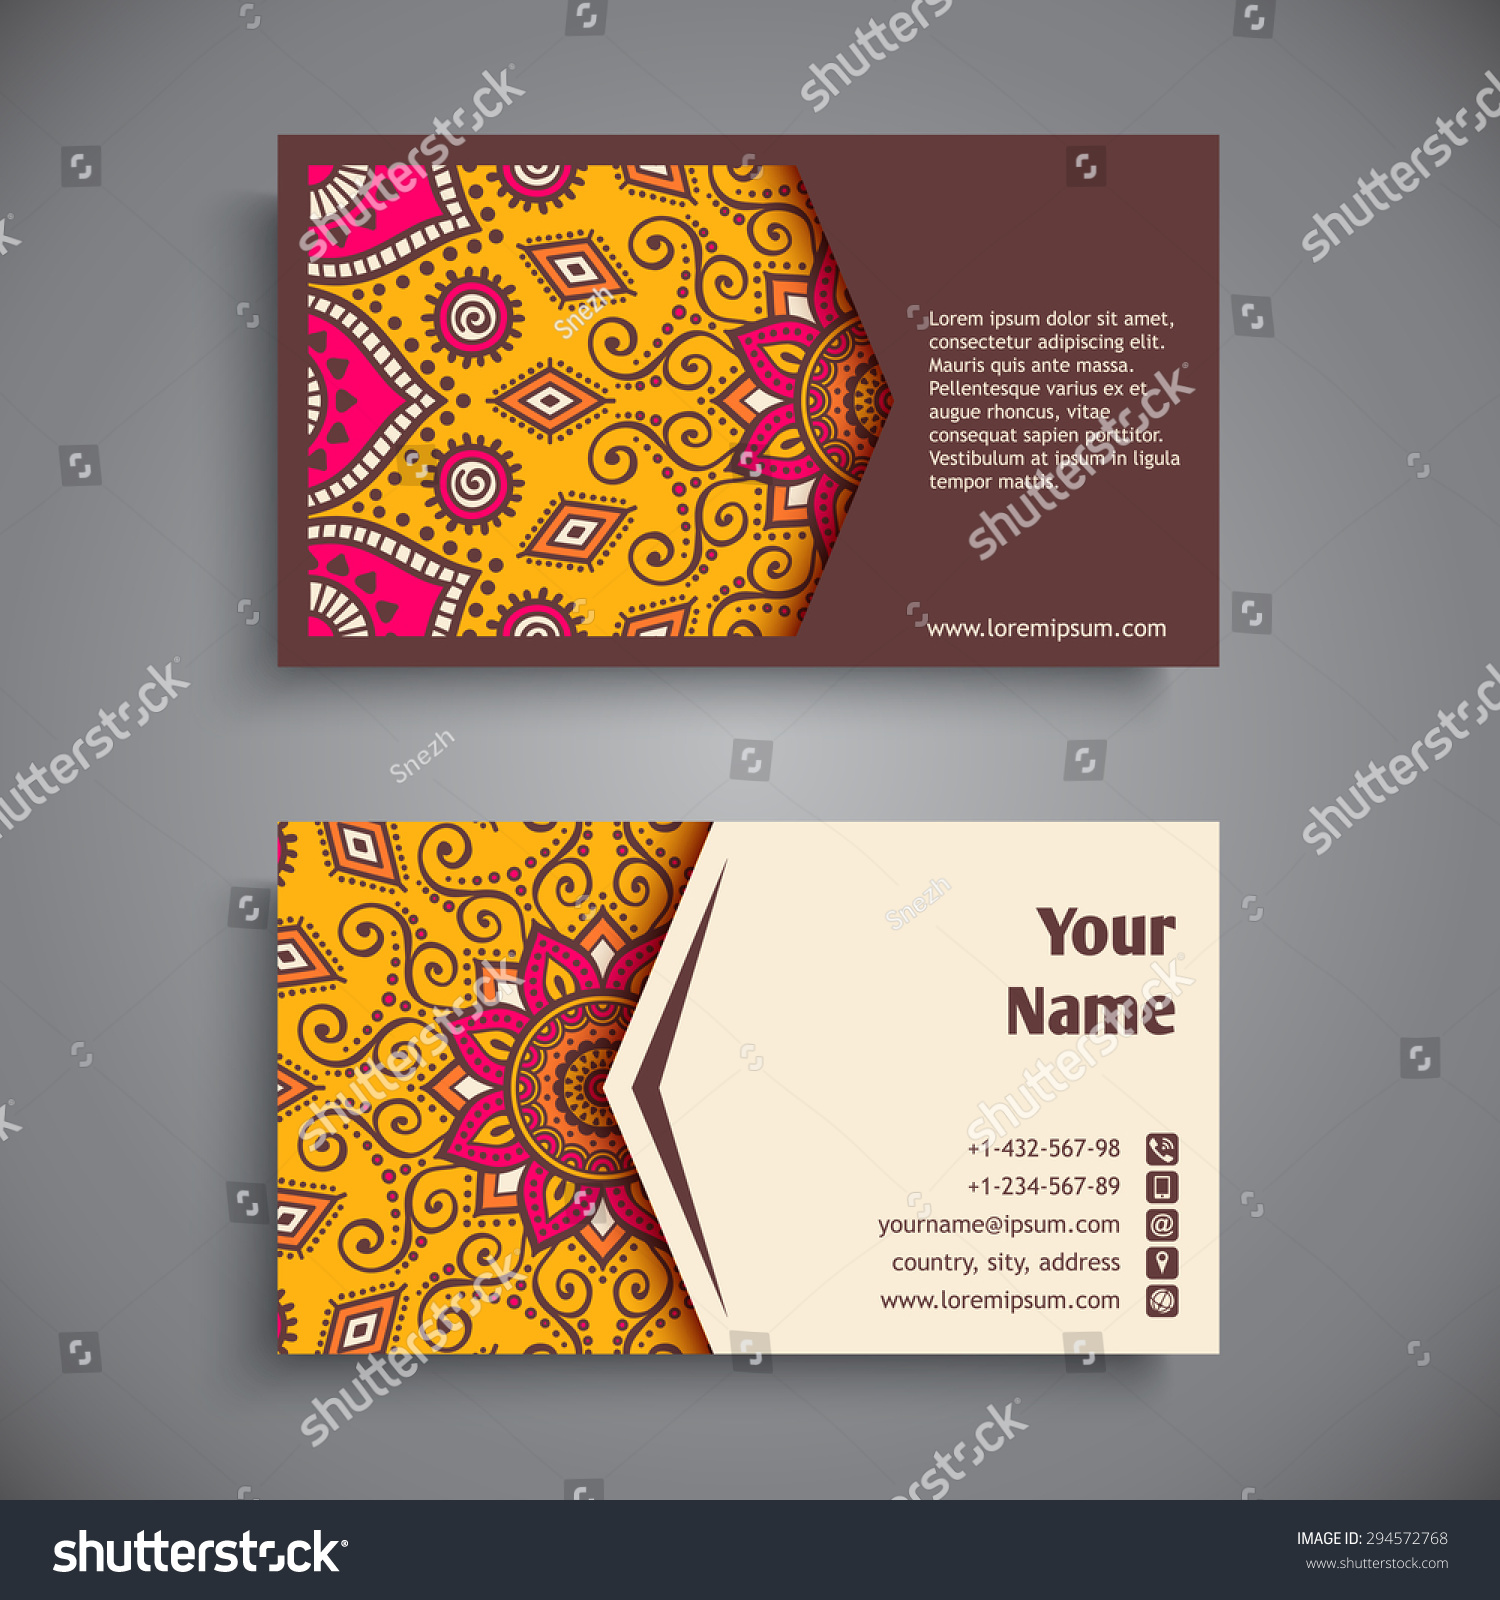 business card clip art free download - photo #46